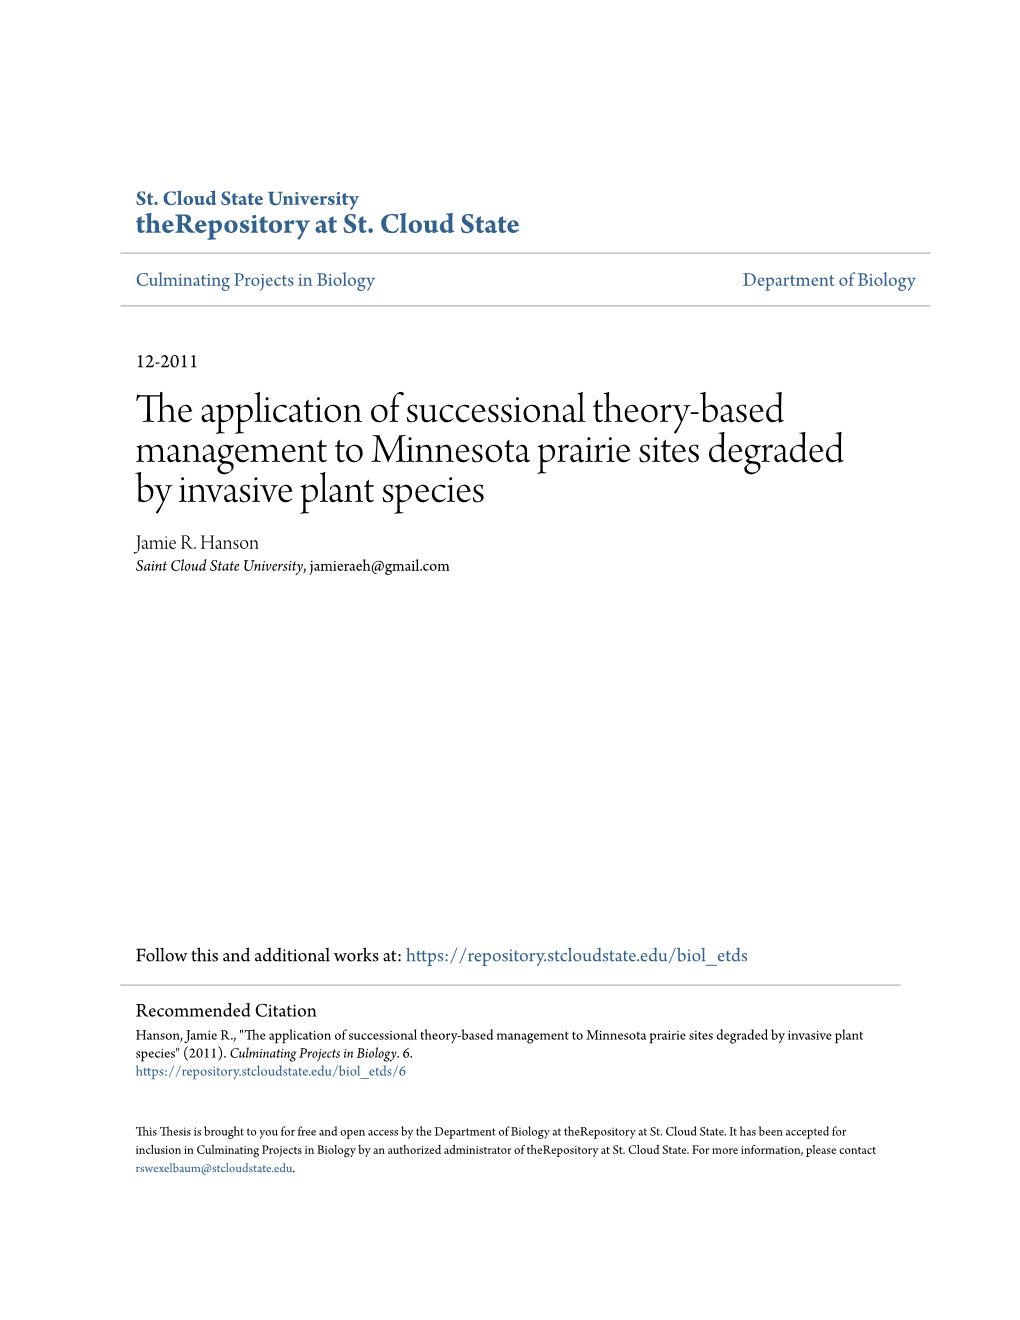 The Application of Successional Theory-Based Management to Minnesota Prairie Sites Degraded by Invasive Plant Species